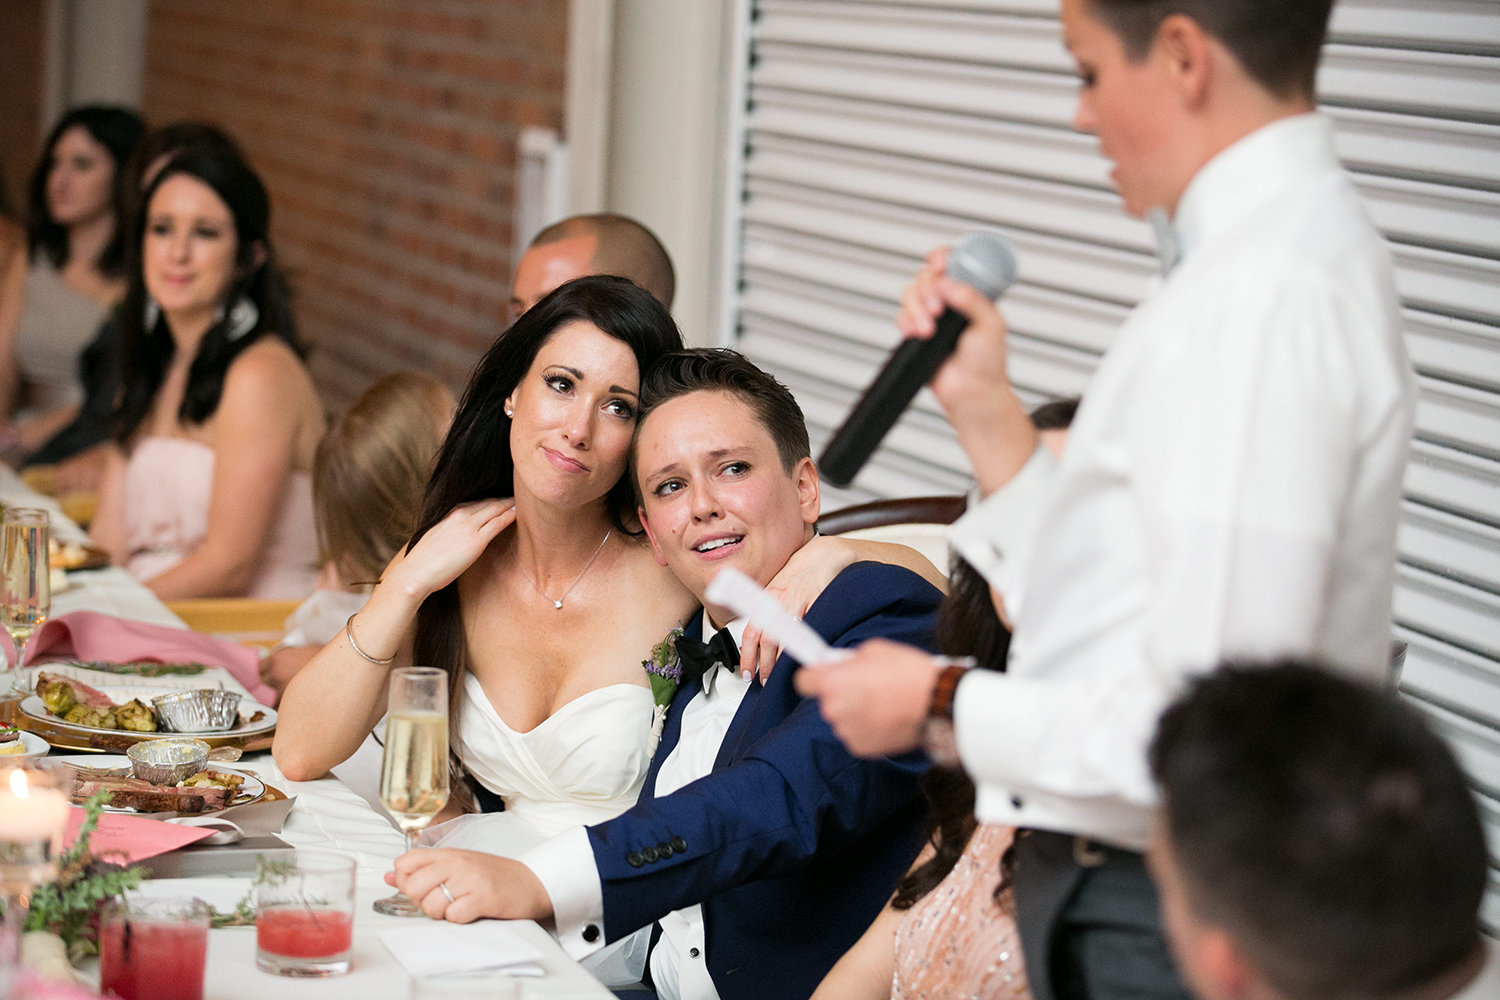 Toasts during a wedding reception